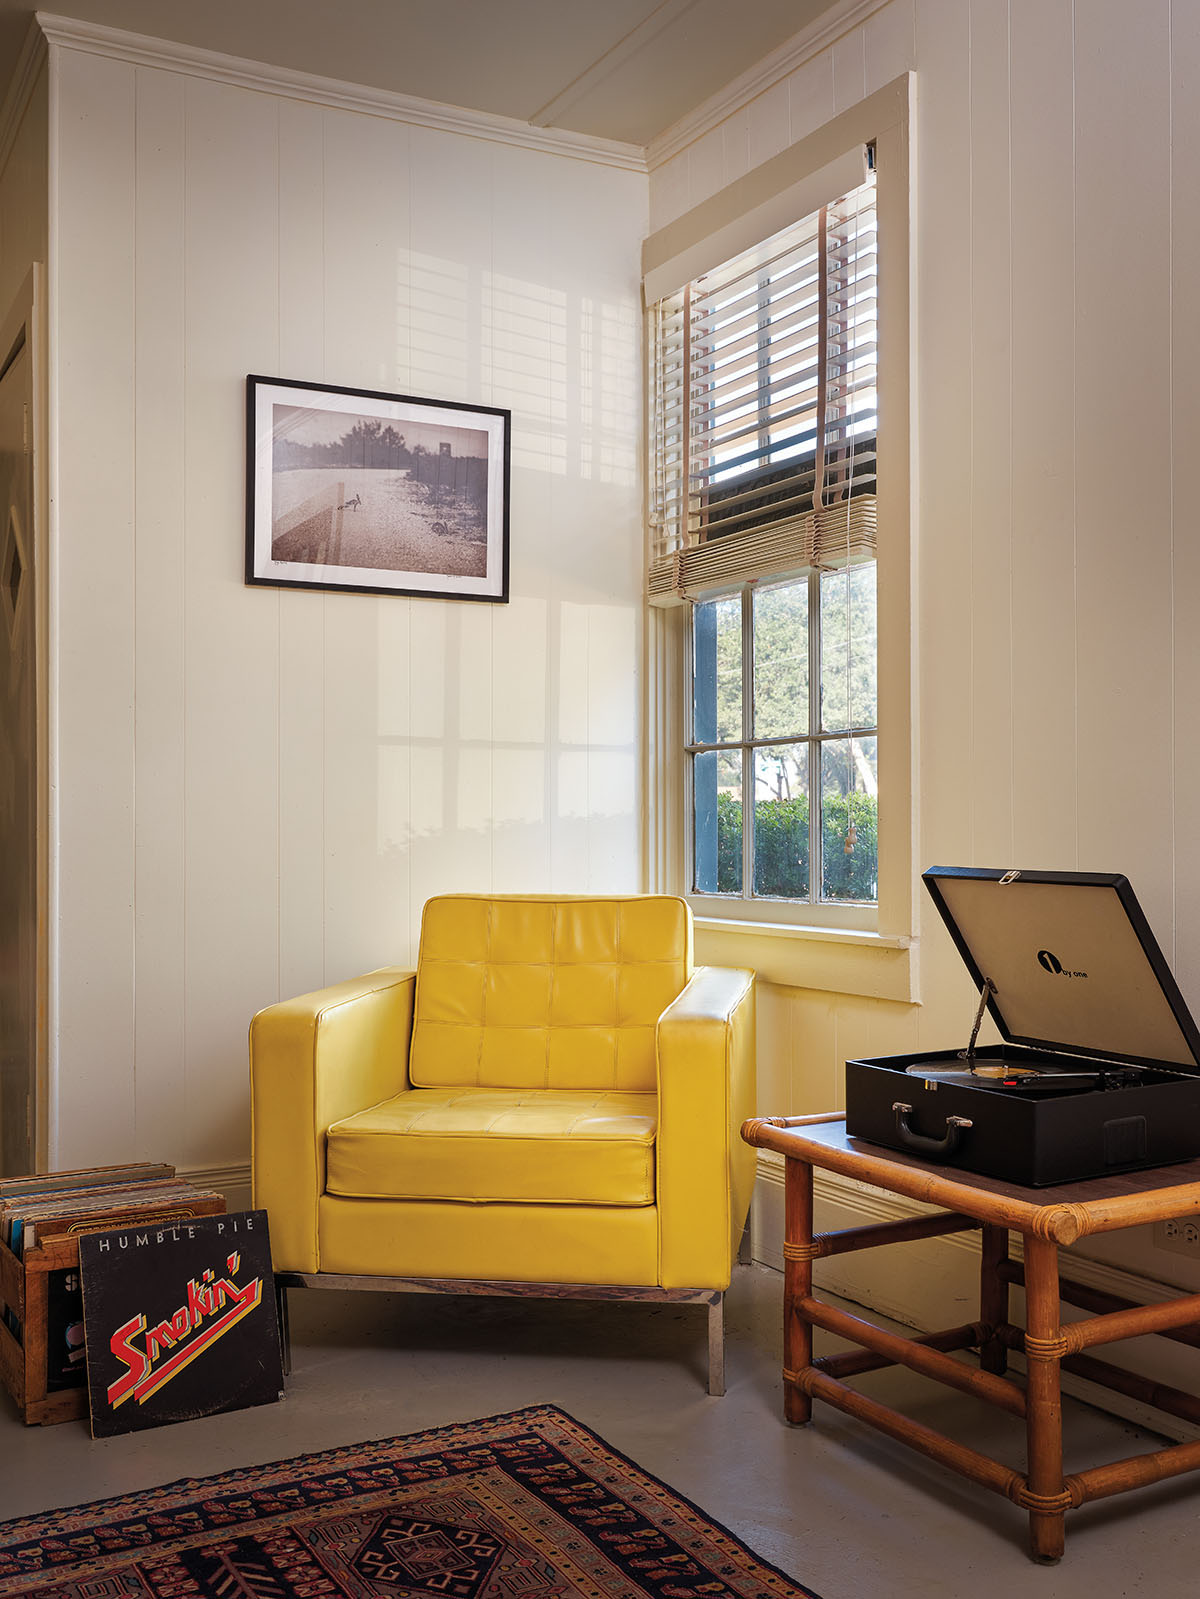 A bright yellow chair is the focal point of a room with bright natural light and a record player